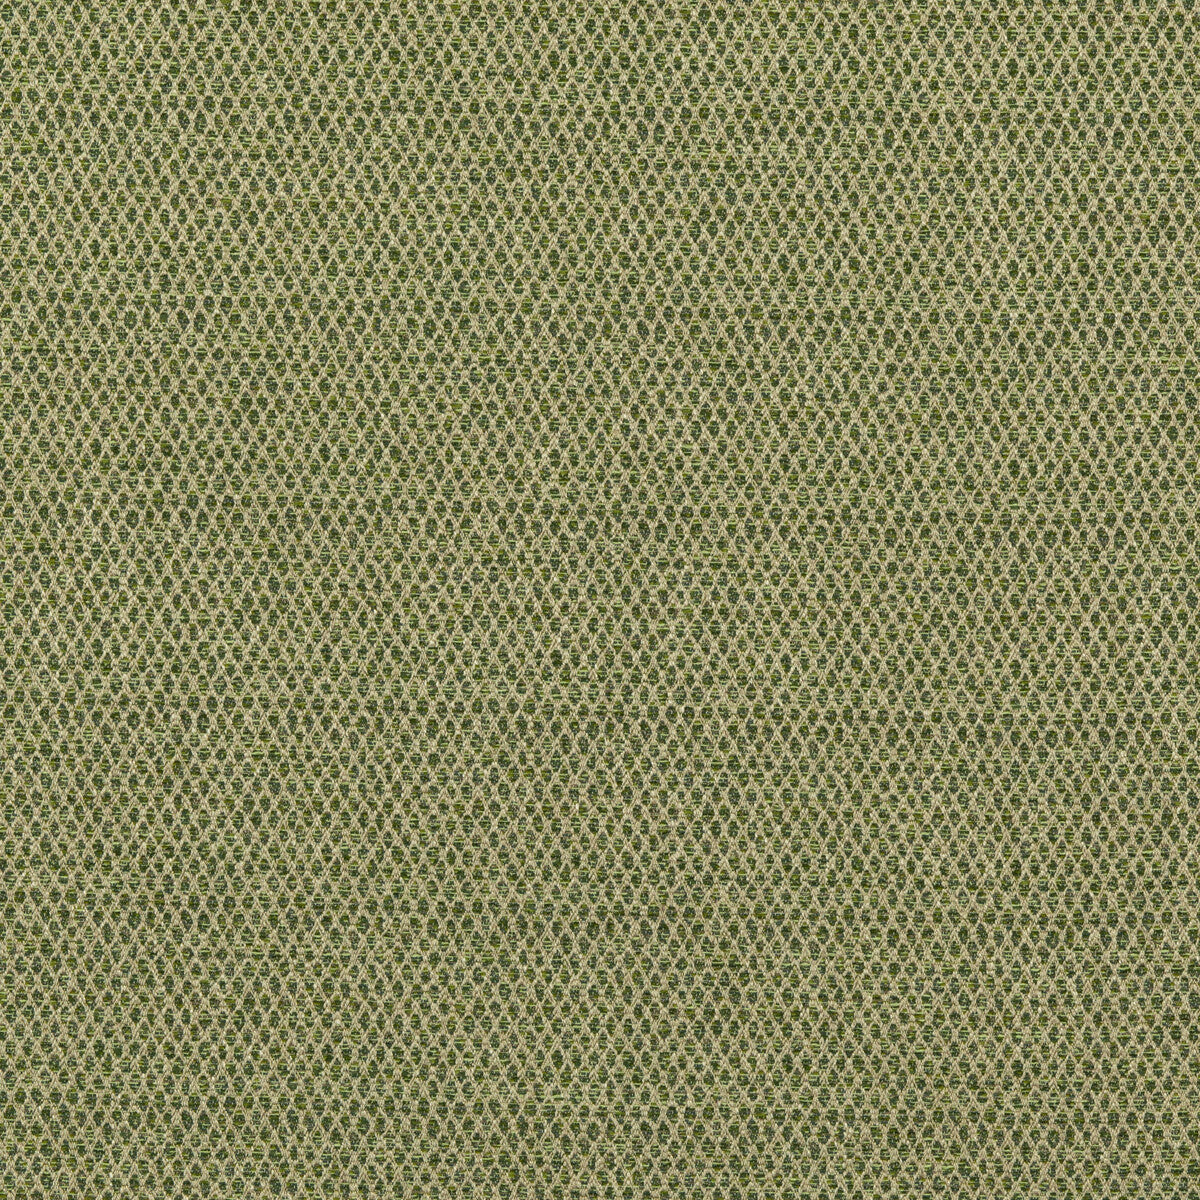 Pednor fabric in green color - pattern BF10874.735.0 - by G P &amp; J Baker in the Essential Colours II collection